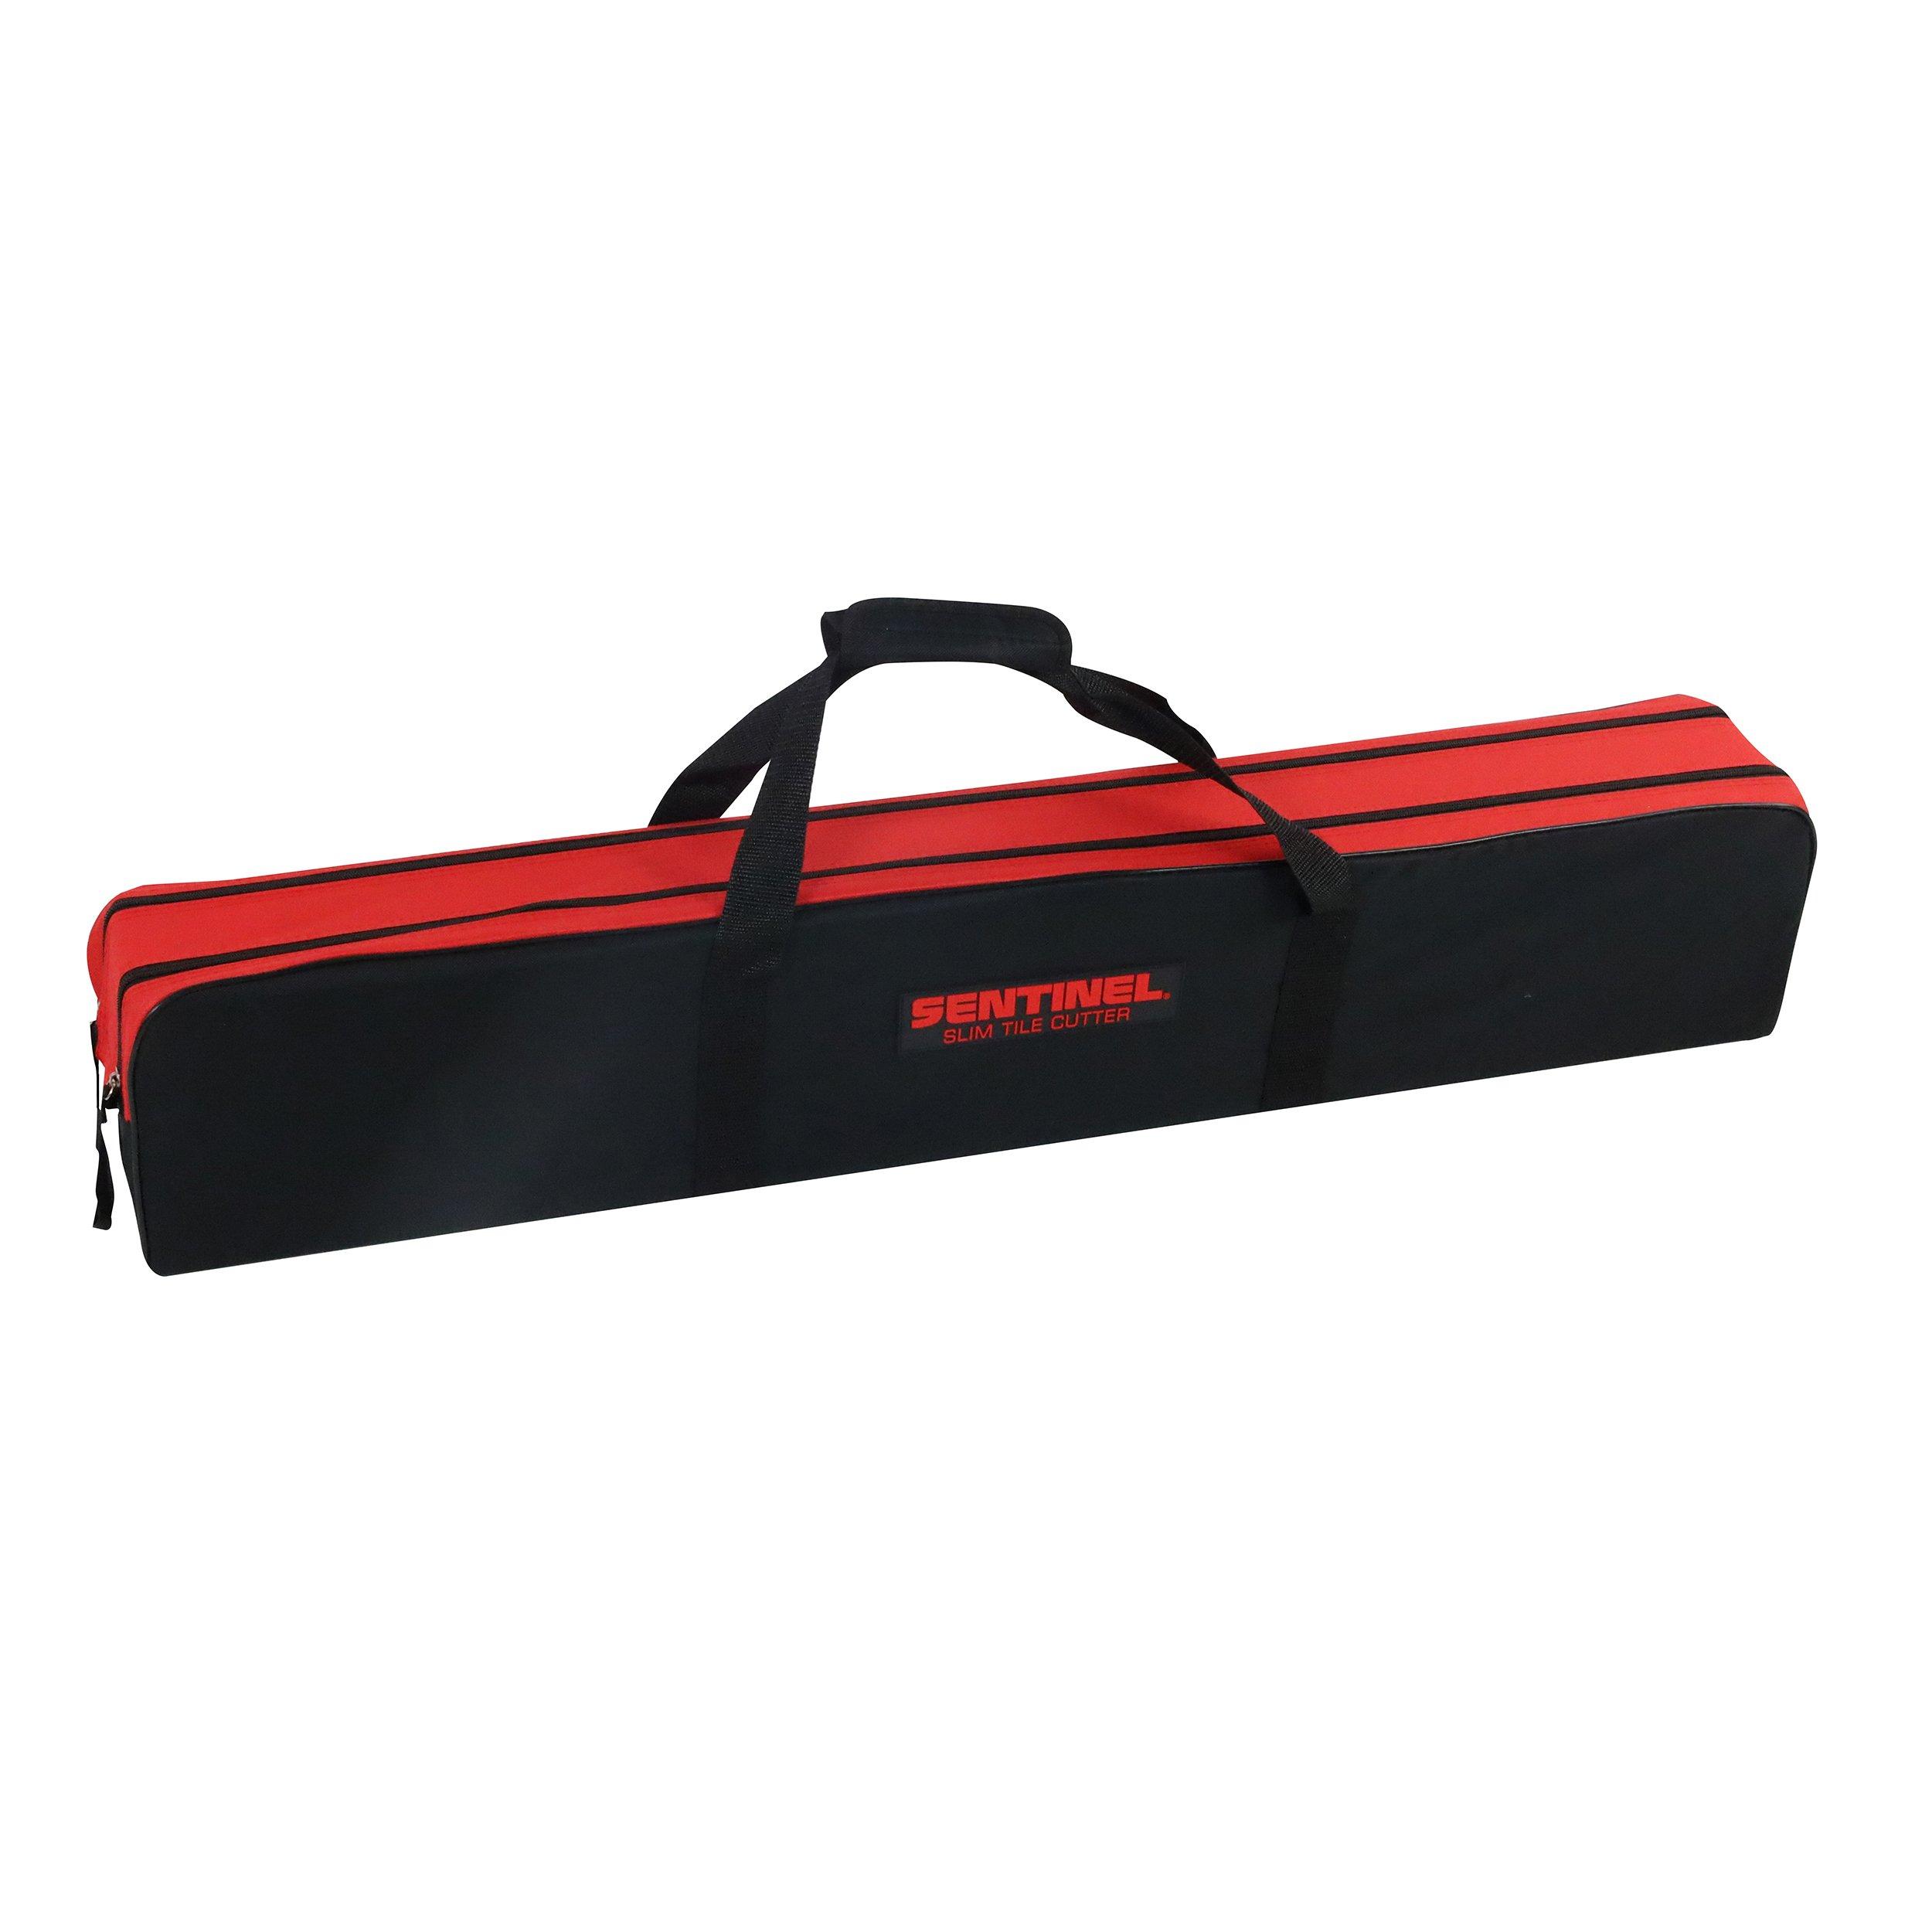 Sentinel 30in. Slim Tile Cutter with Bag